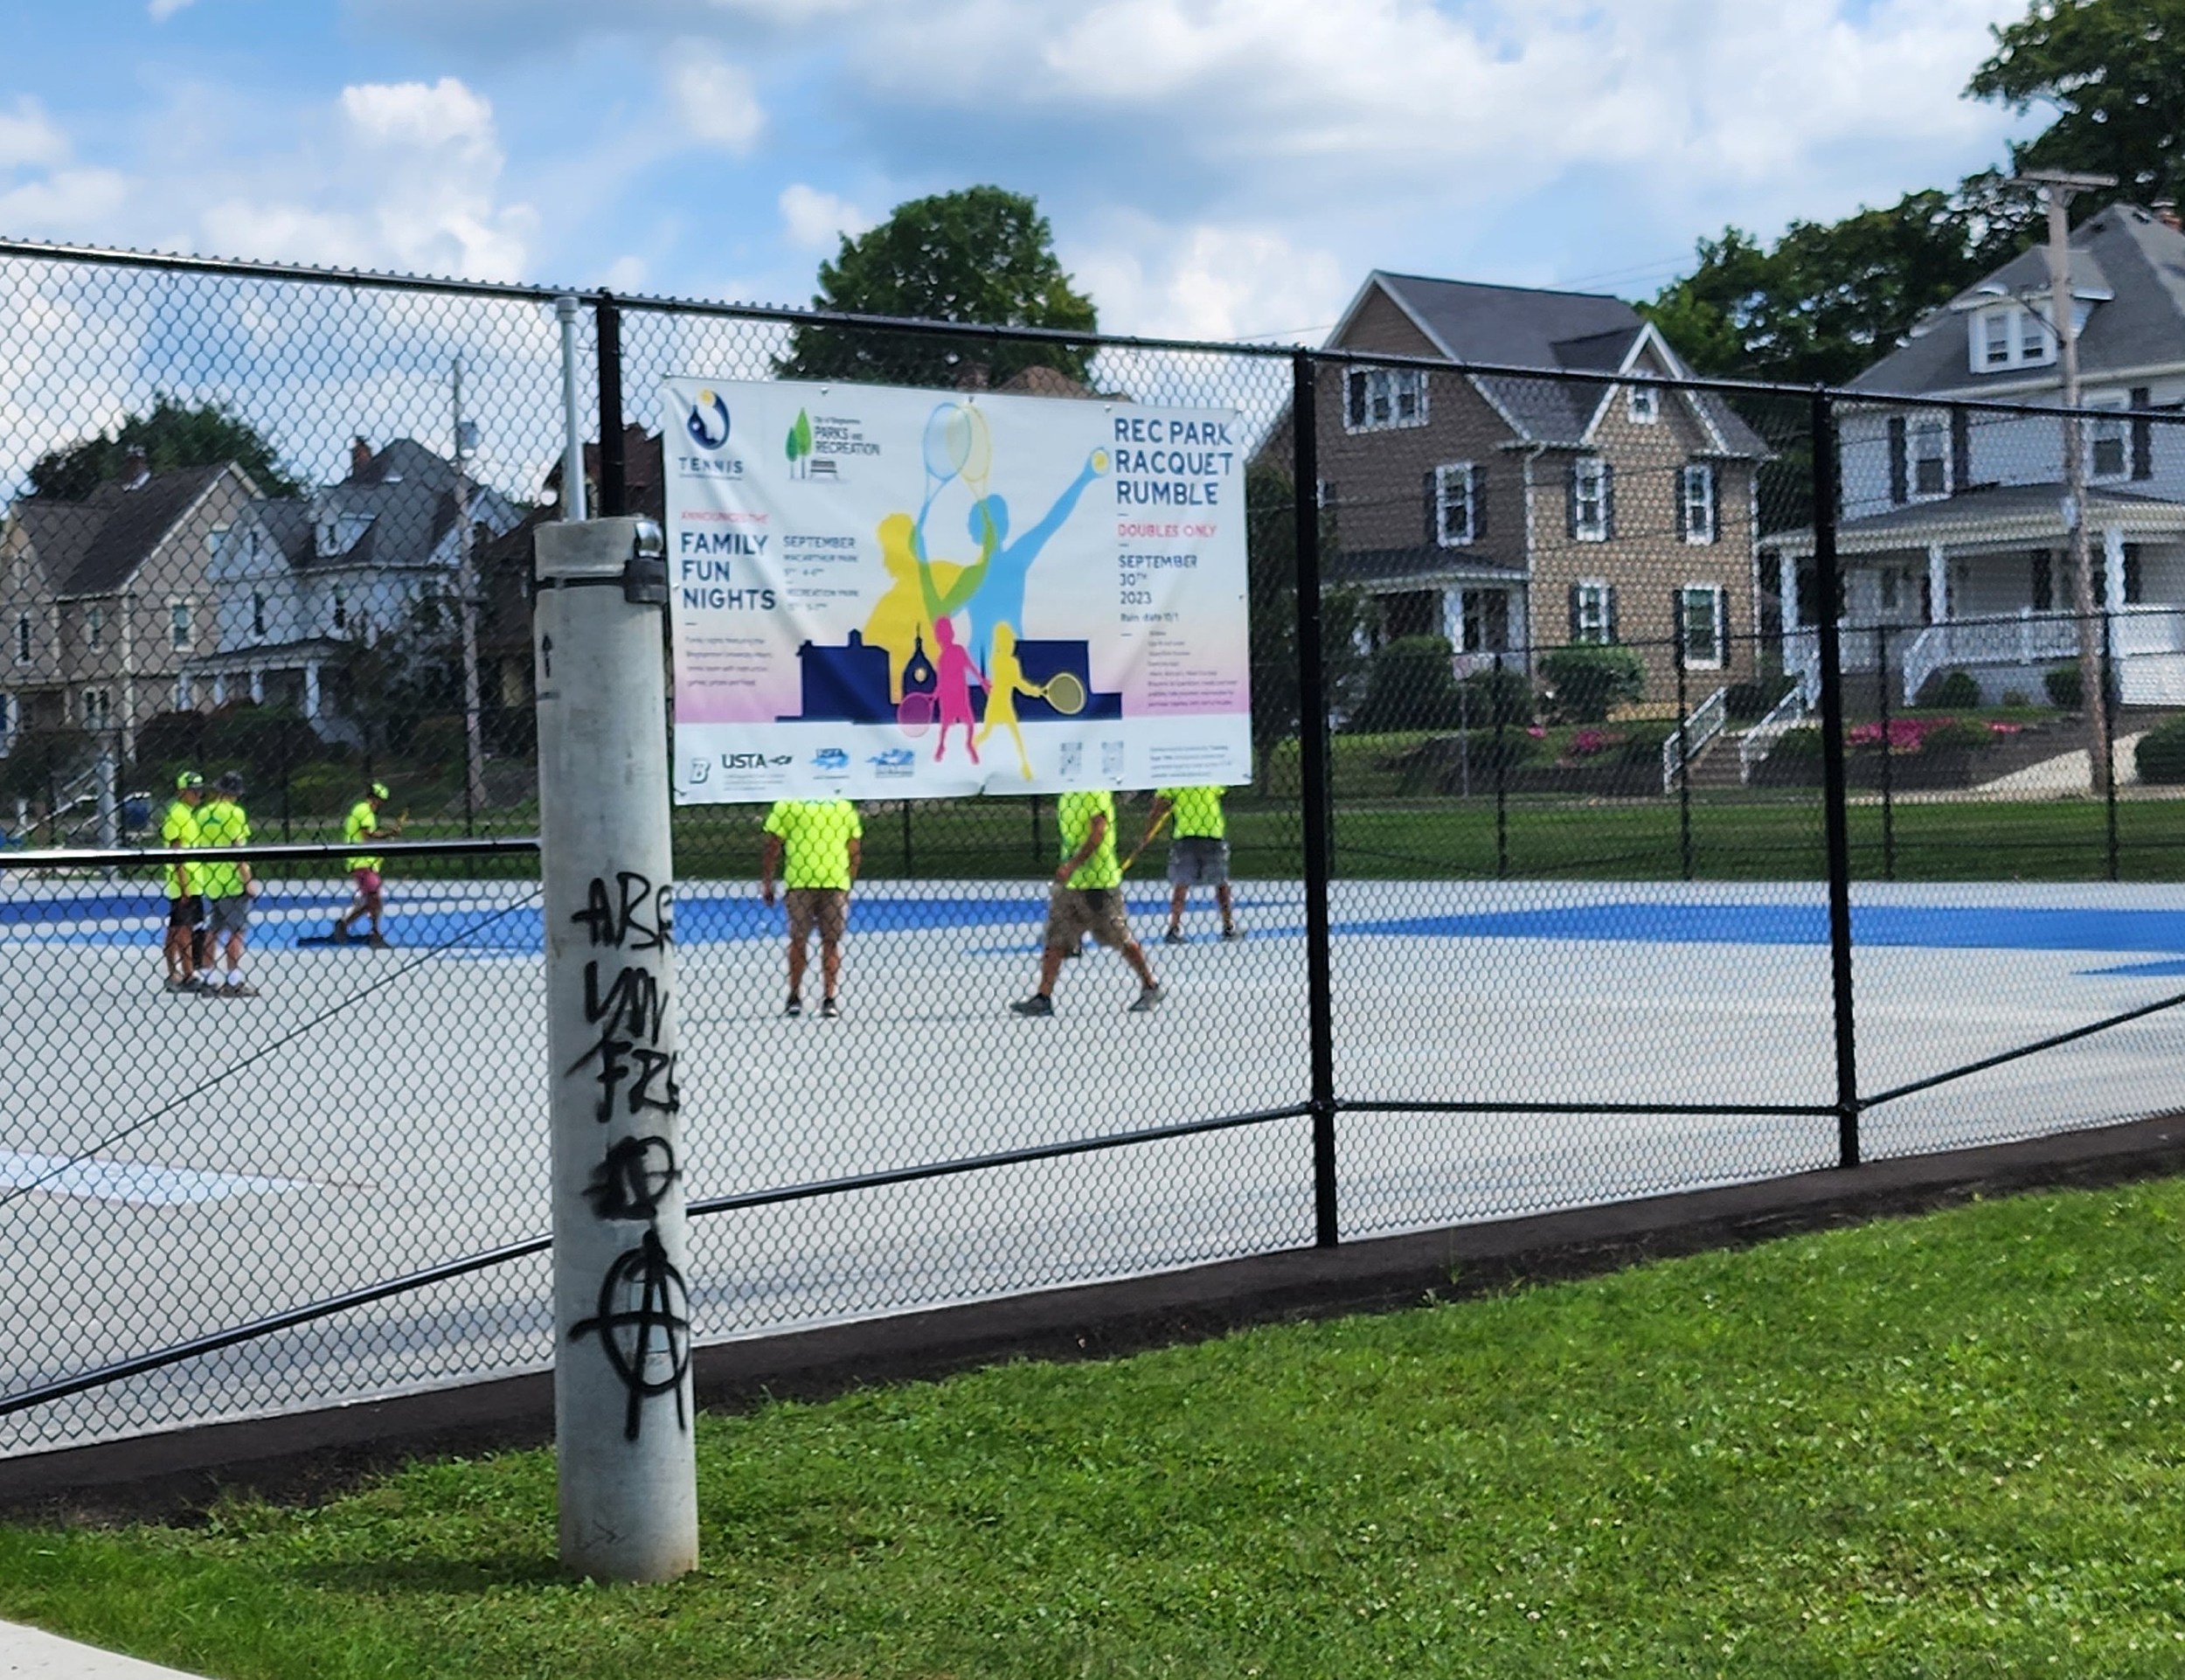 Rec Park Tennis Courts May Finally Open for Play This Month photo image